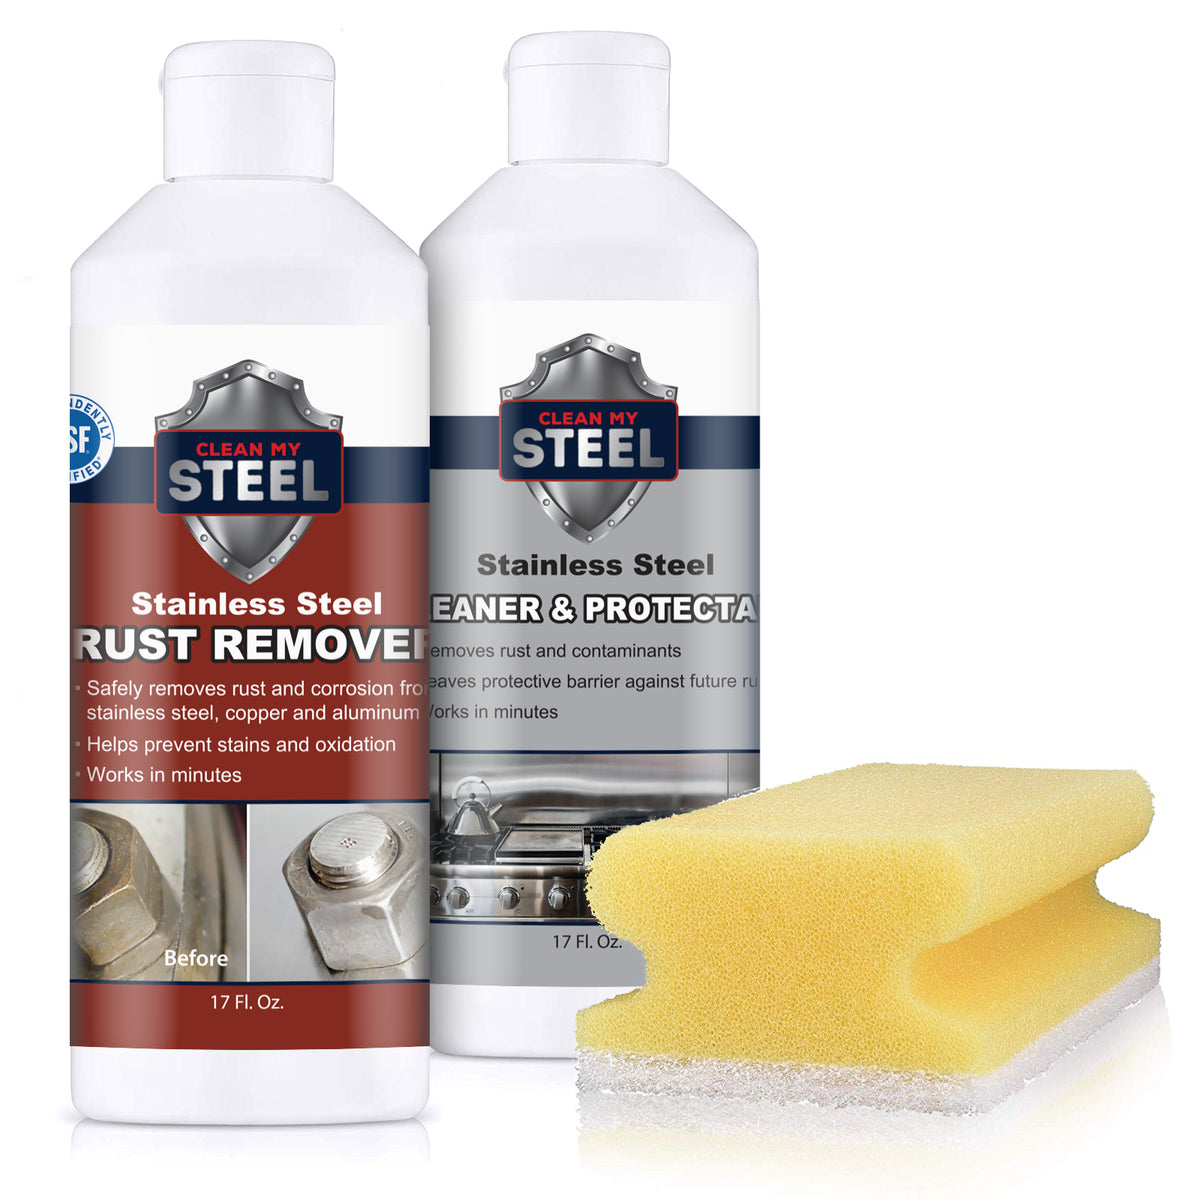 Stainless Steel Rust Remover and Protectant Kits